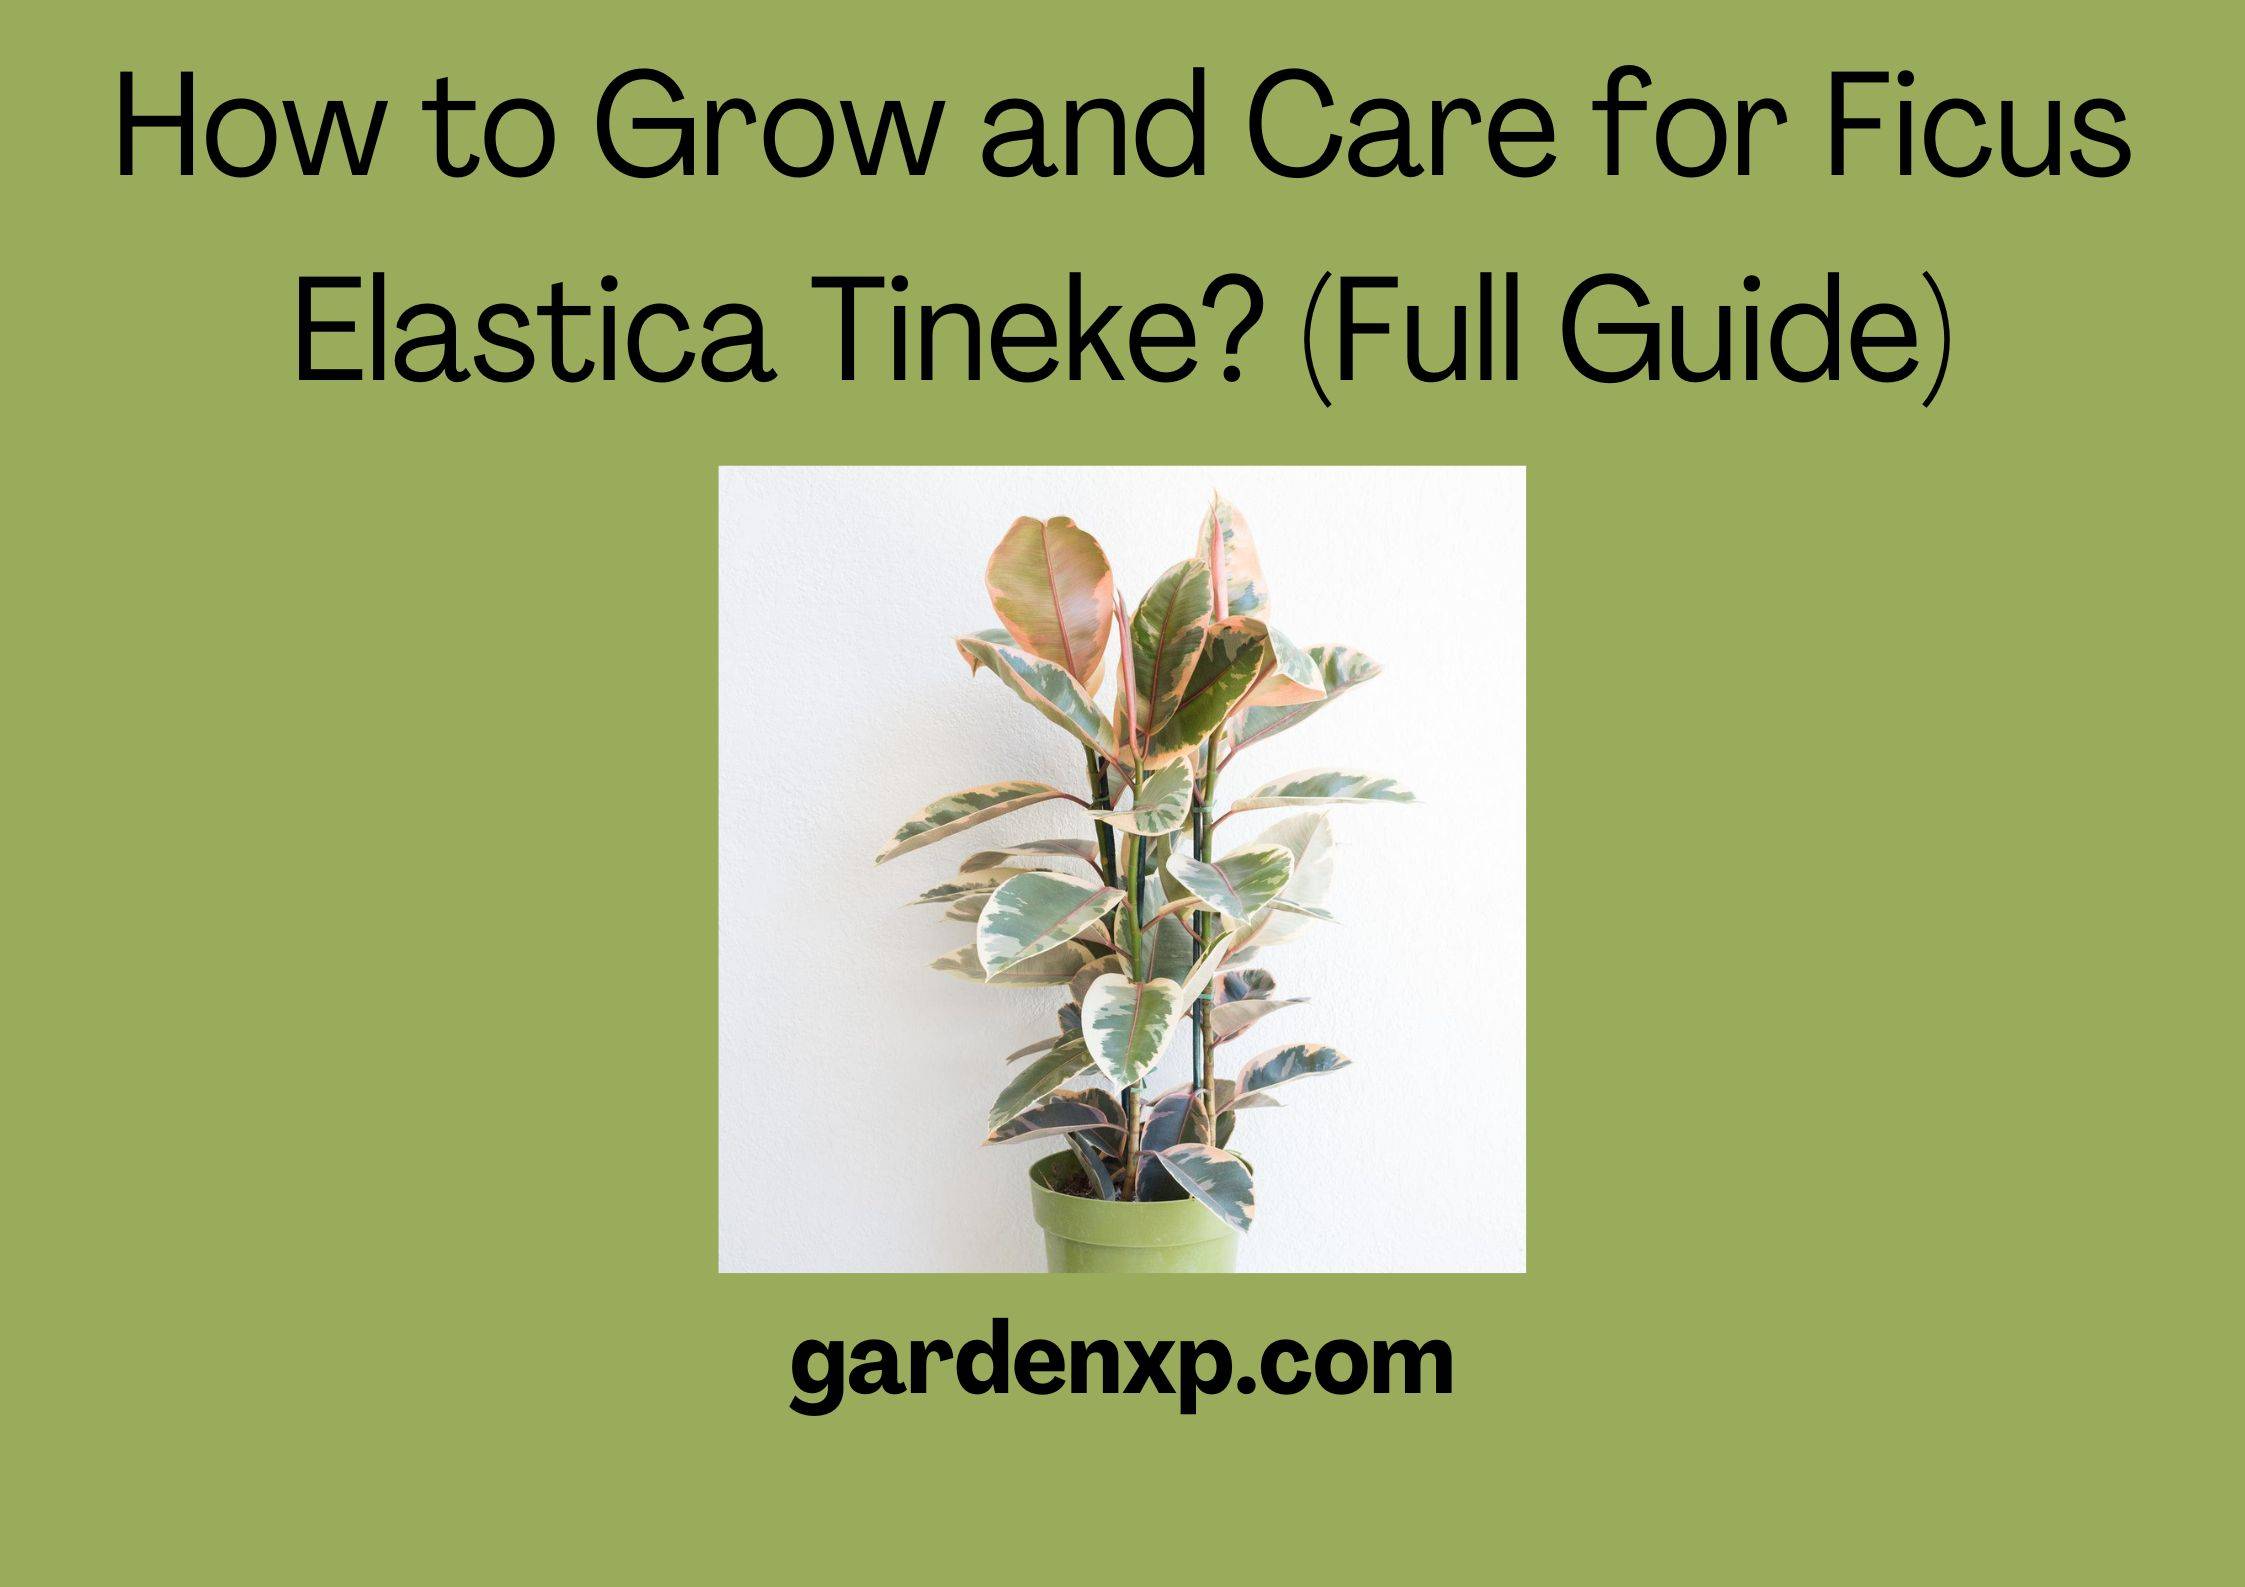 How to Grow and Care for Ficus Elastica Tineke? (Full Guide)